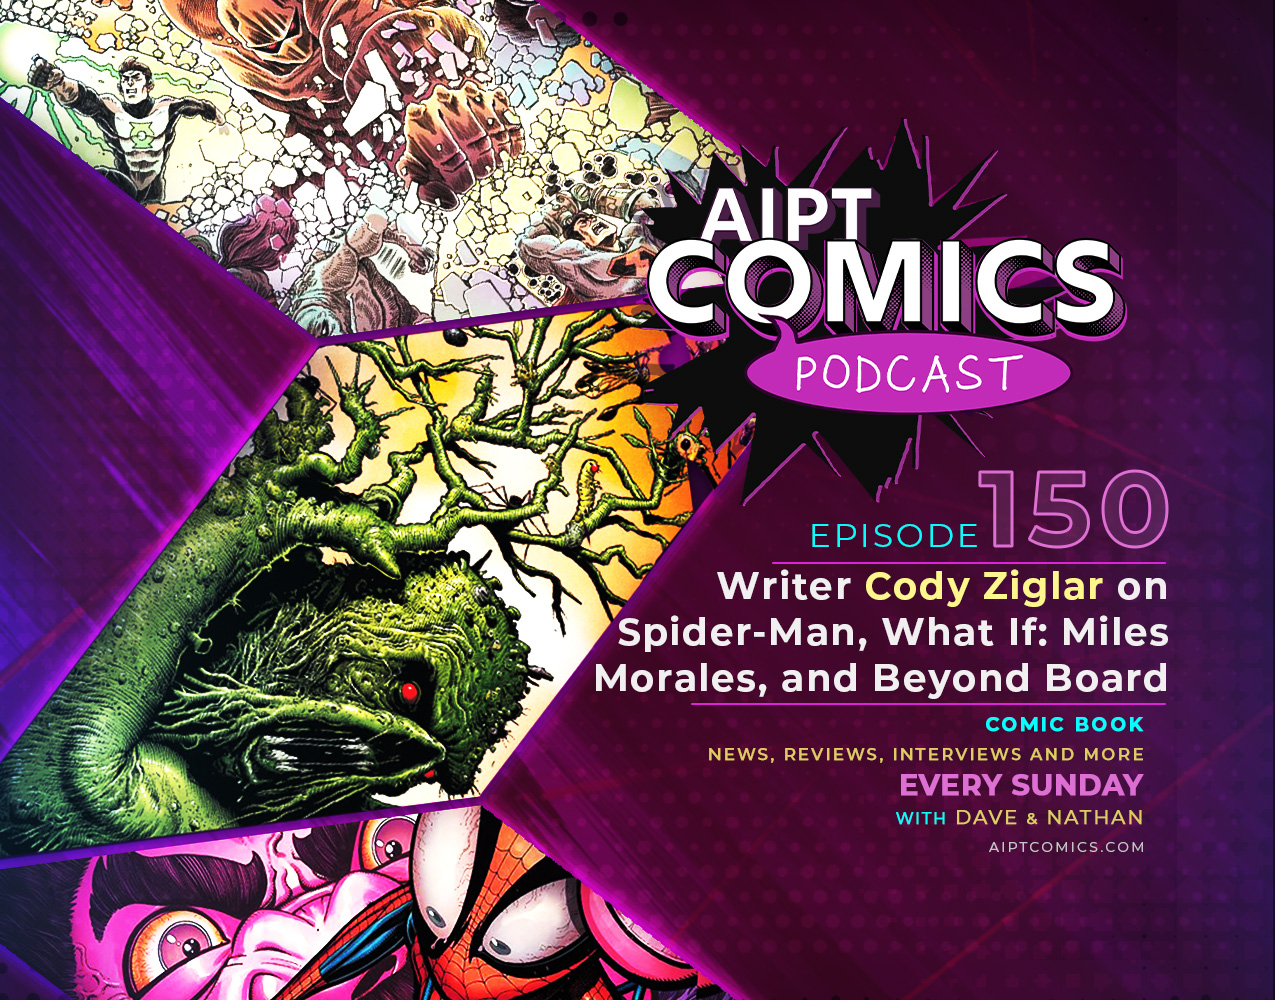 AIPT Comics podcast episode 150: Writer Cody Ziglar on Spider-Man, What If: Miles Morales, and Beyond Board